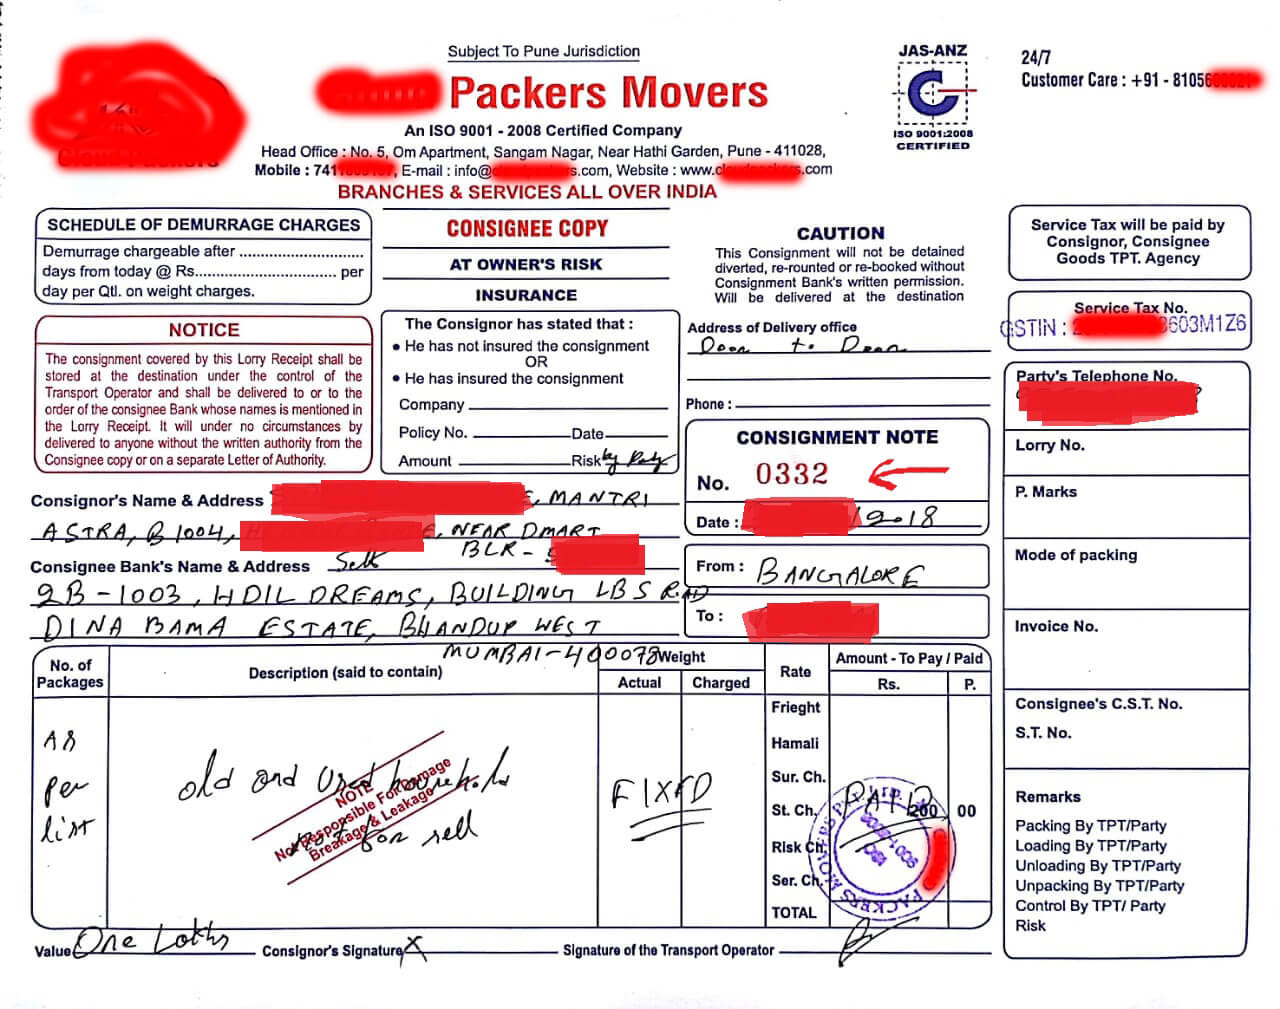 Second Smaple copy of packers and movers bilty